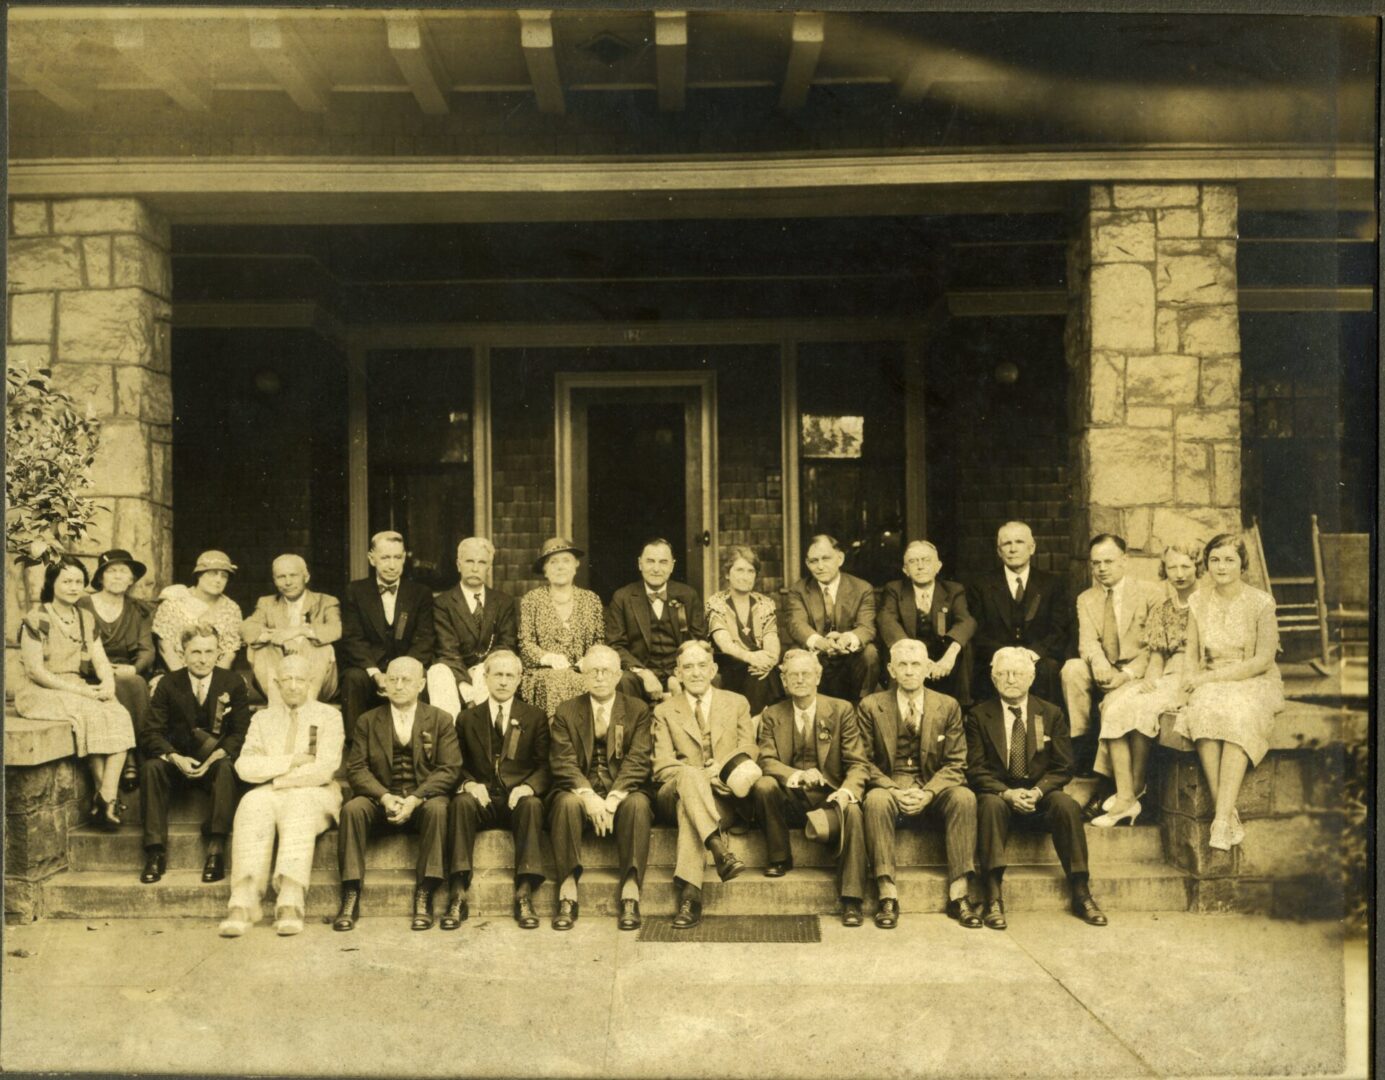 1893 University of Georgia Law Class 45th Reunion
35 graduated.  18 were living at the time of this 1938 reunion.